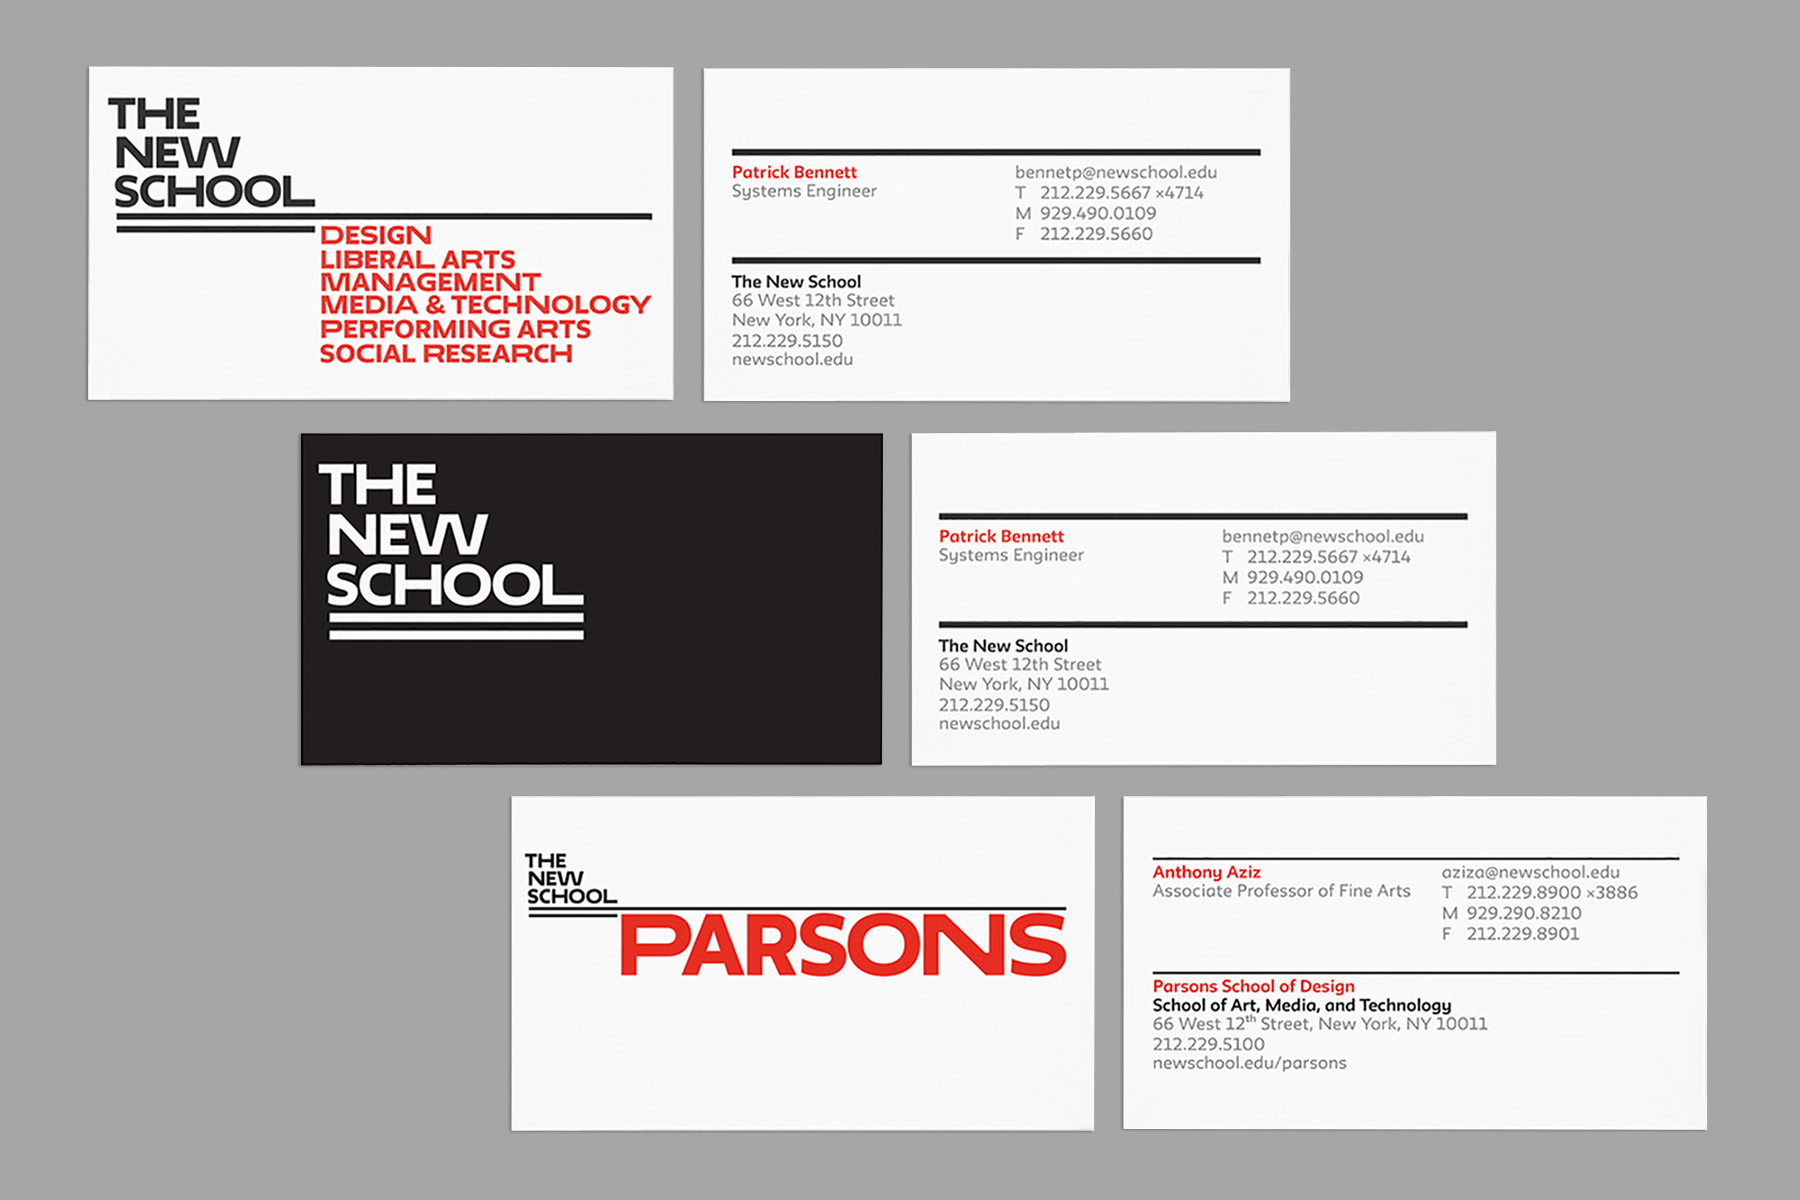 The New School brand collateral